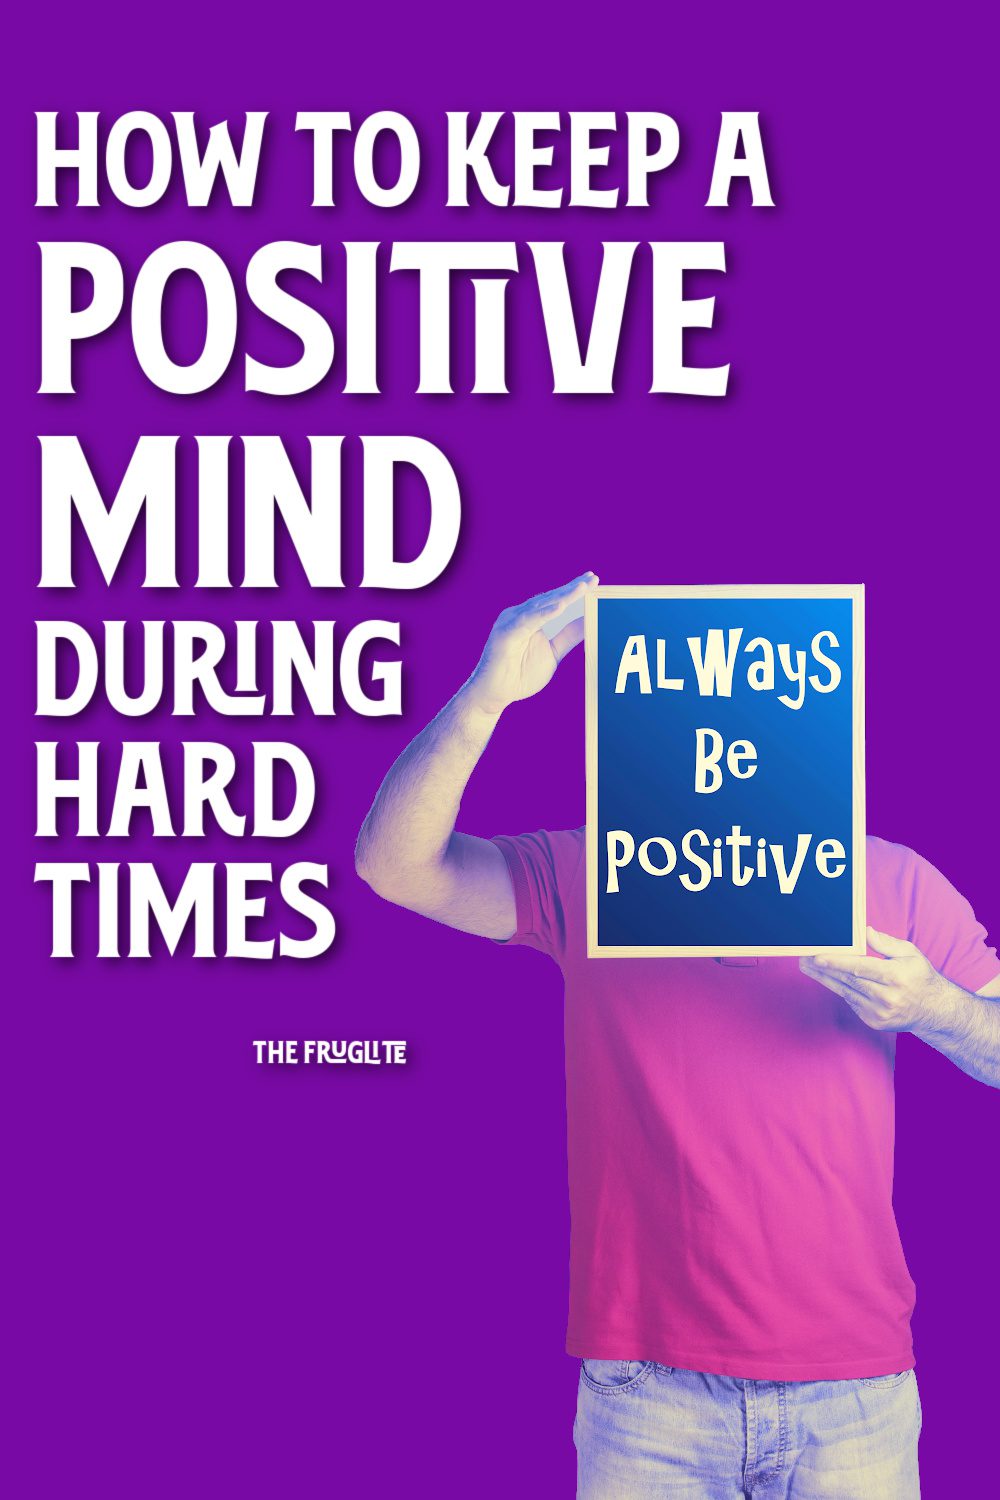 How To Keep A Positive Mind During Hard Times